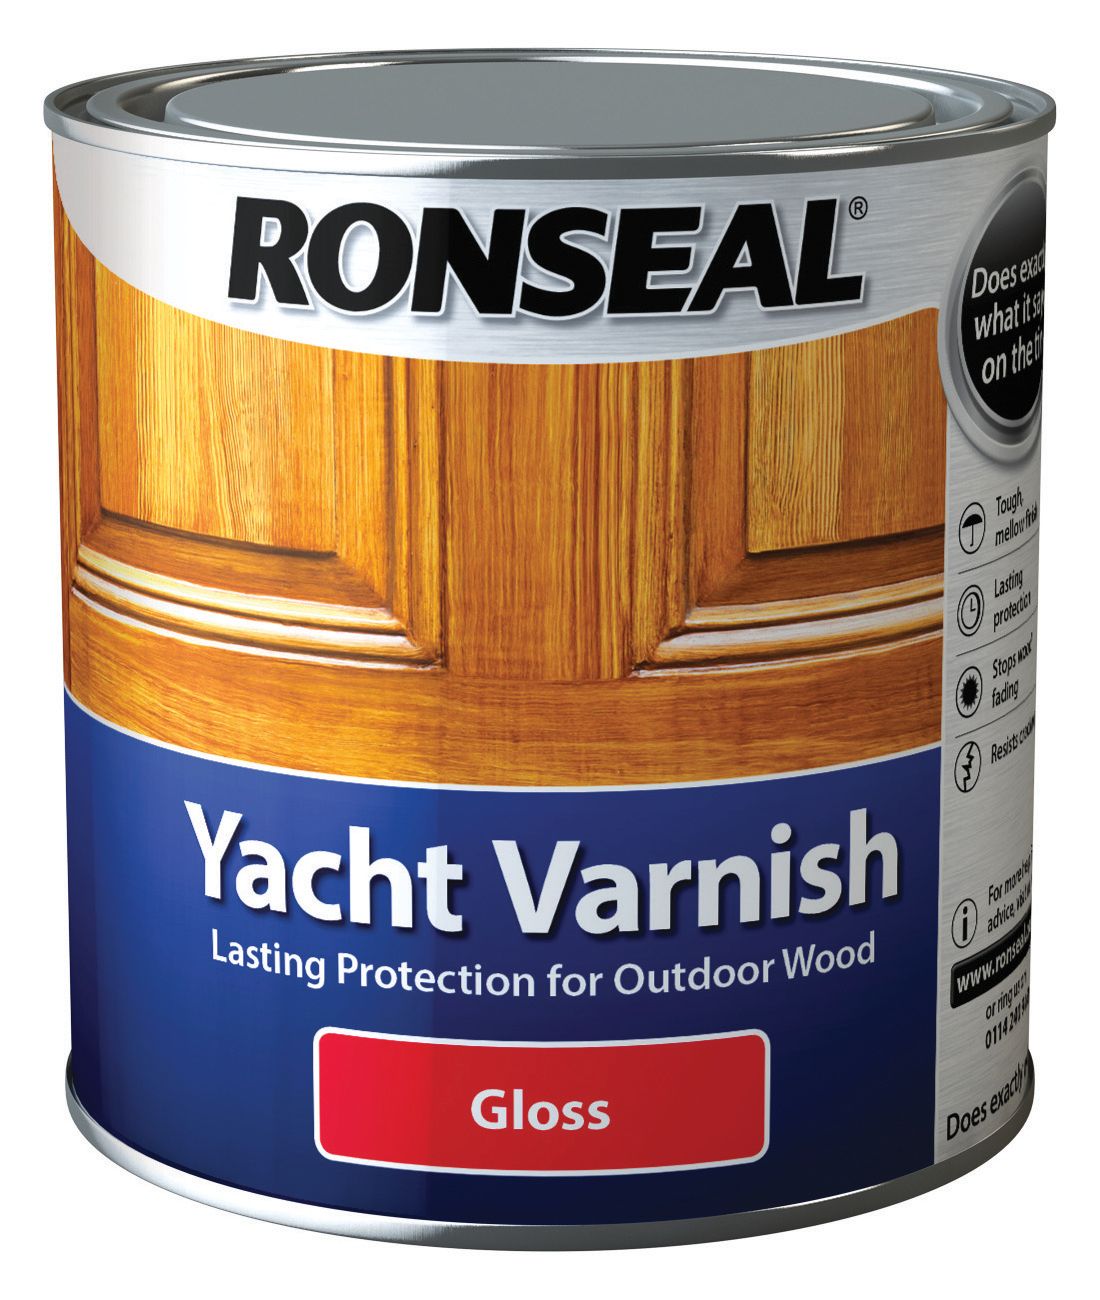 Image of Ronseal Exterior Yacht Varnish Gloss - 1L